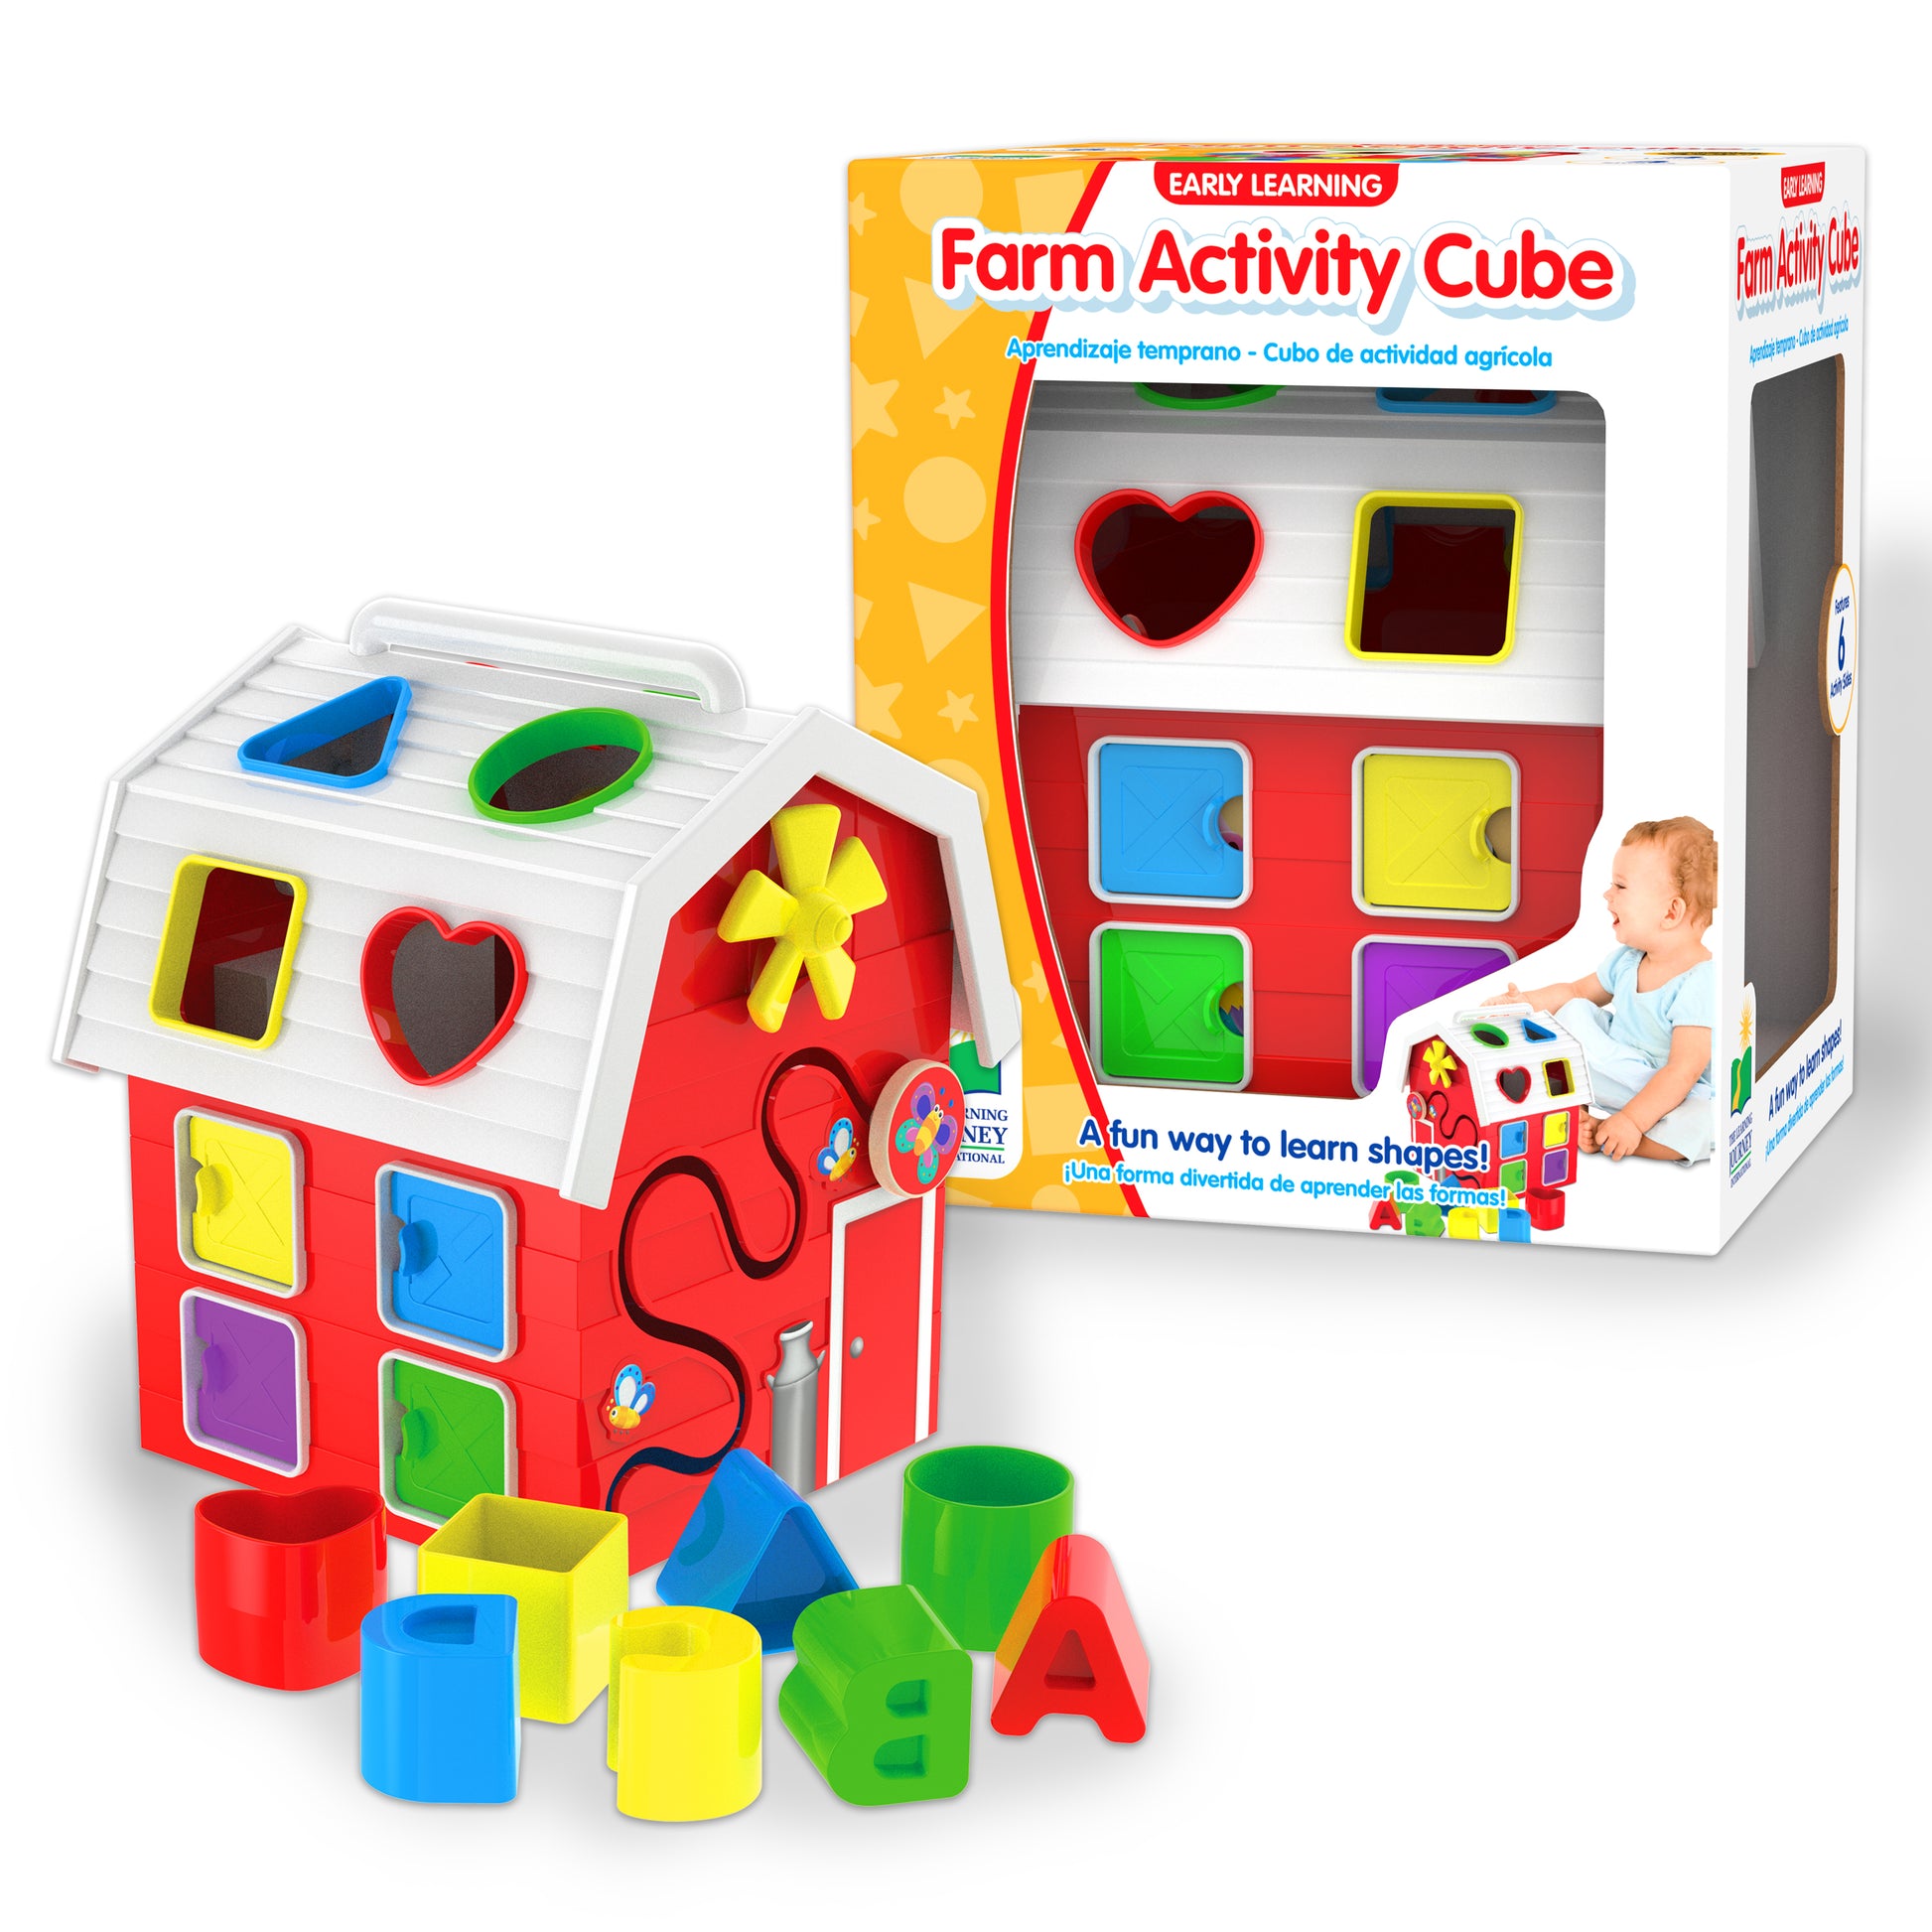 Farm Activity Cube product and packagaing.